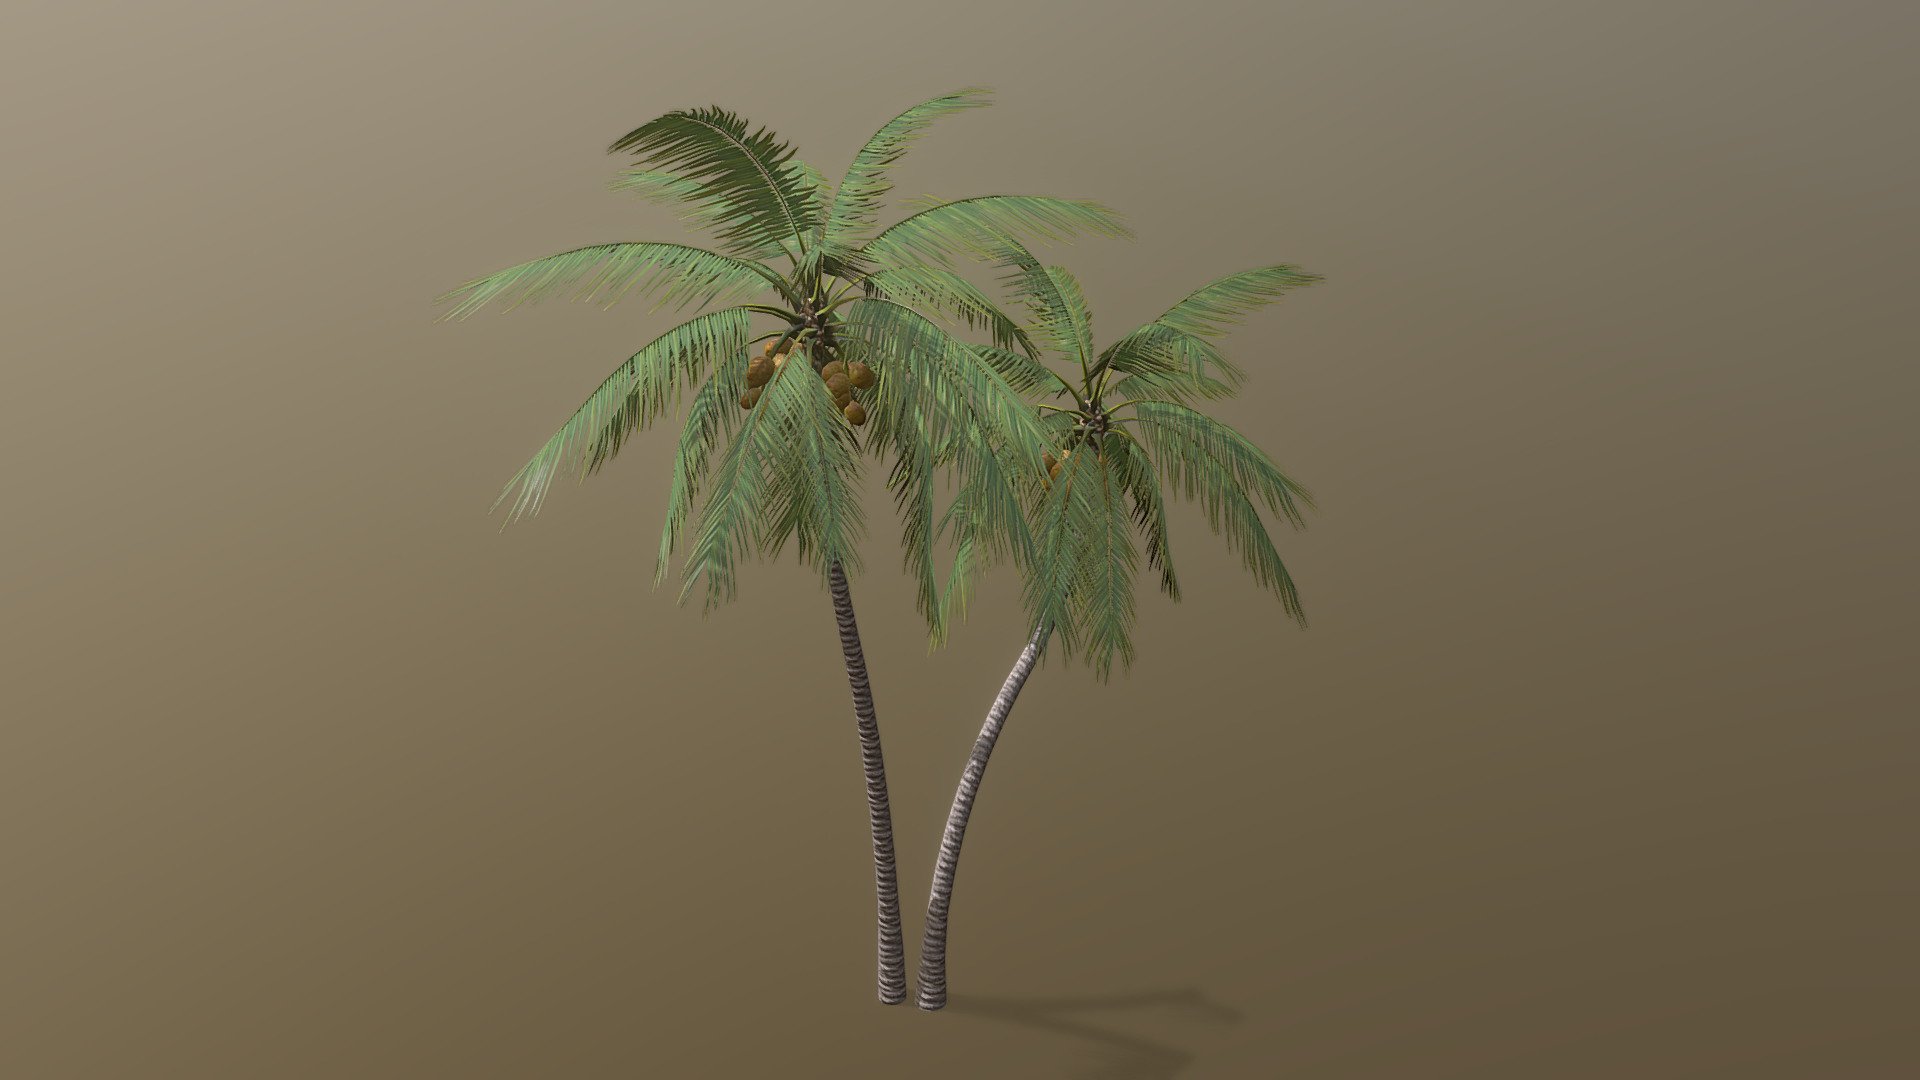 coconut palm created in treeit.

I'm in the middle of making some major changes and updating treeit the app the this palm was made in, so there is going to be a slight delay in creating and uploading new models 3d model